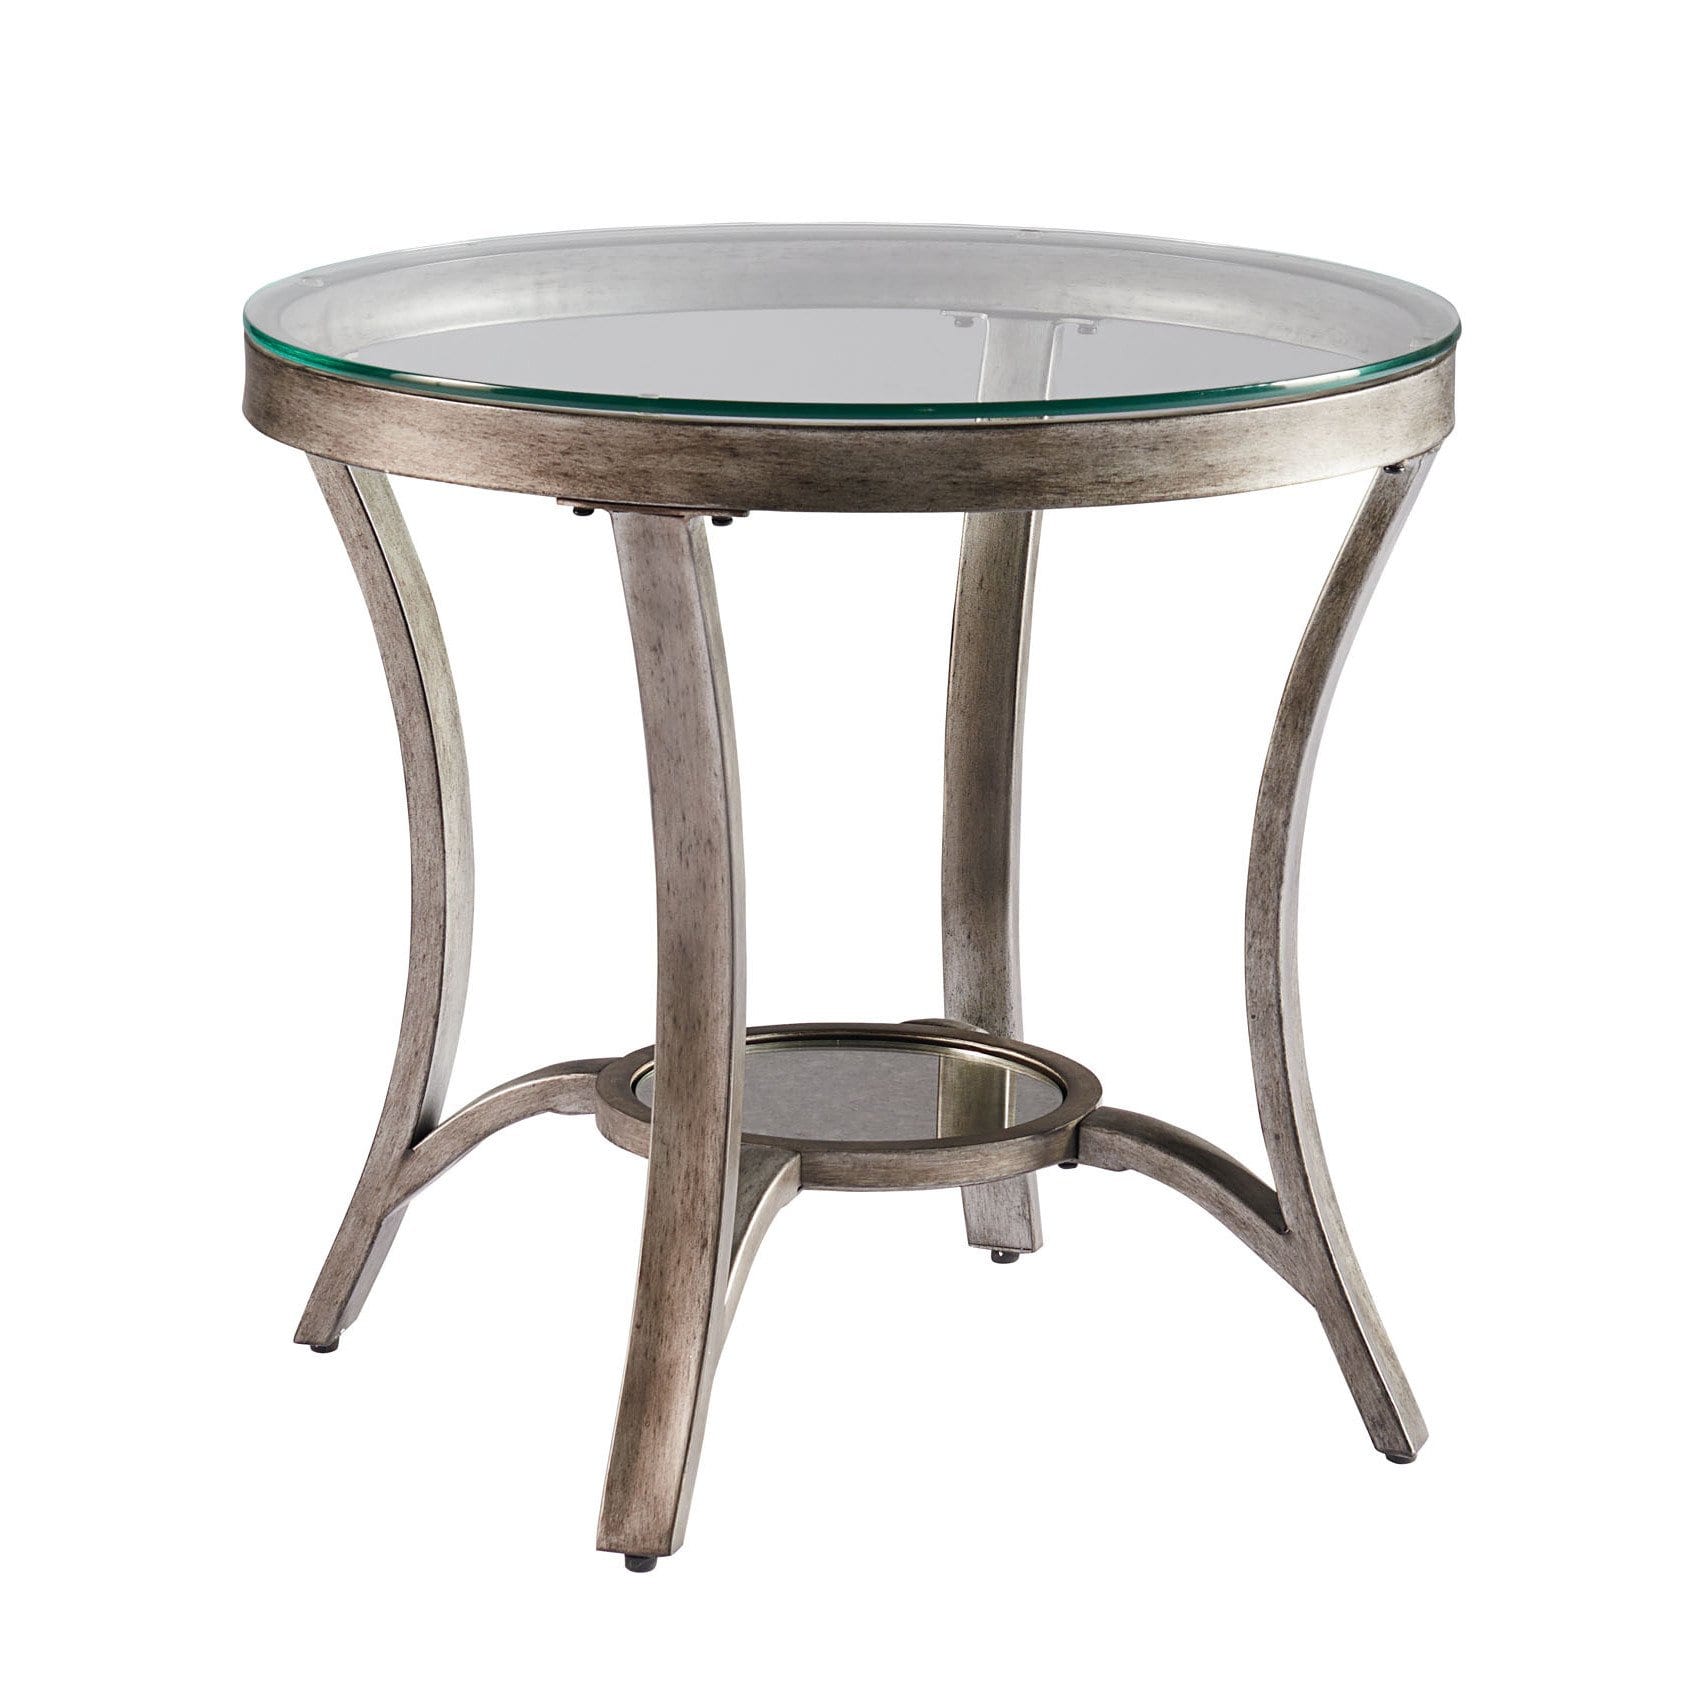 cole grey metal round end table with glass top free shipping diy dog crate bumper what time does homesense close home decor brown couch brent cross signature design furniture inch